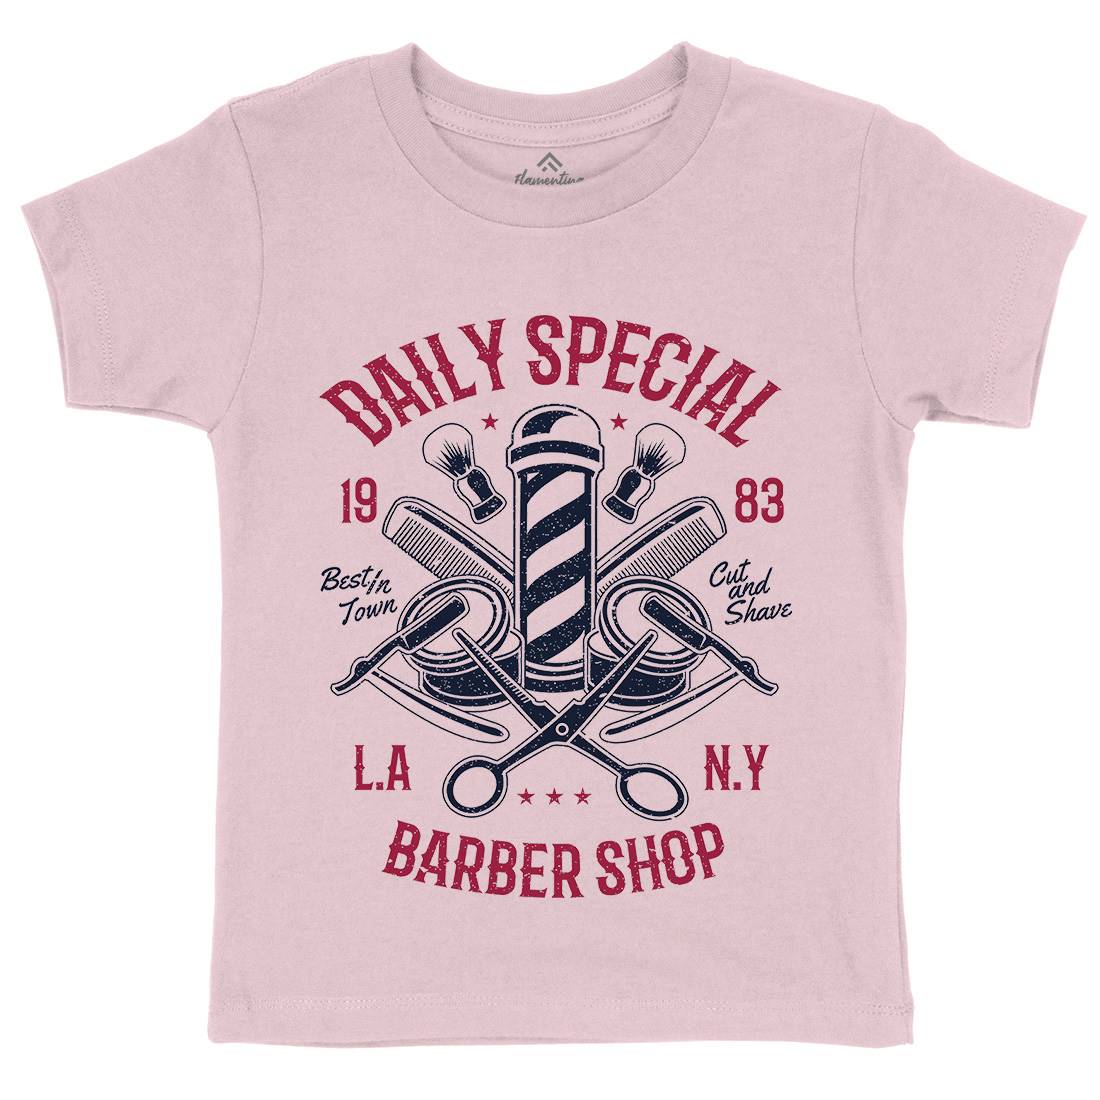 Daily Special Shop Kids Crew Neck T-Shirt Barber A041